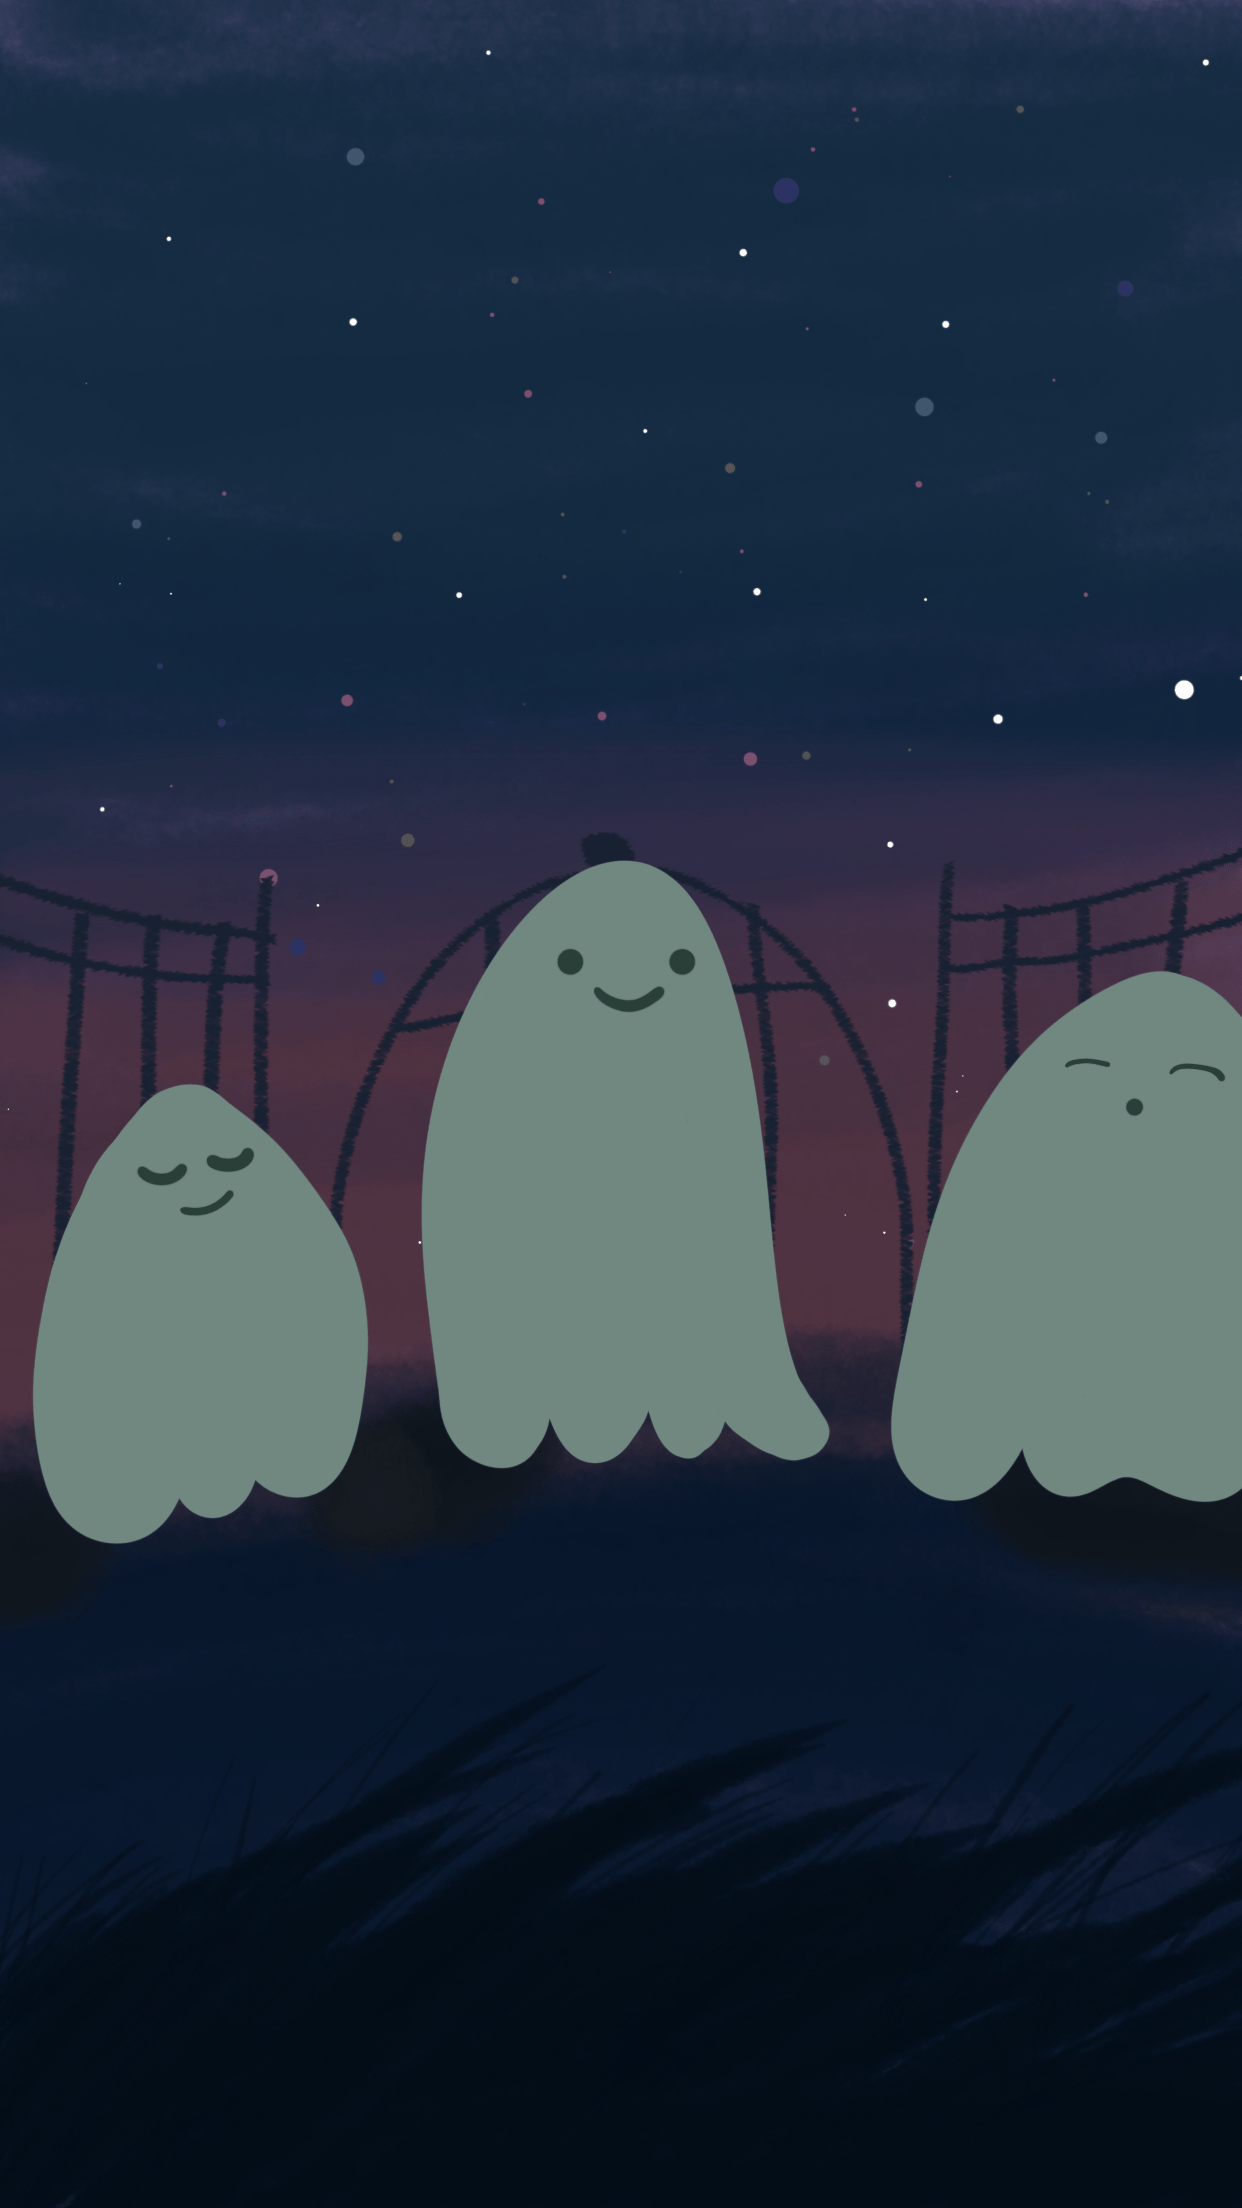 A group of three friendly looking ghosts floating in the night sky. - Ghost